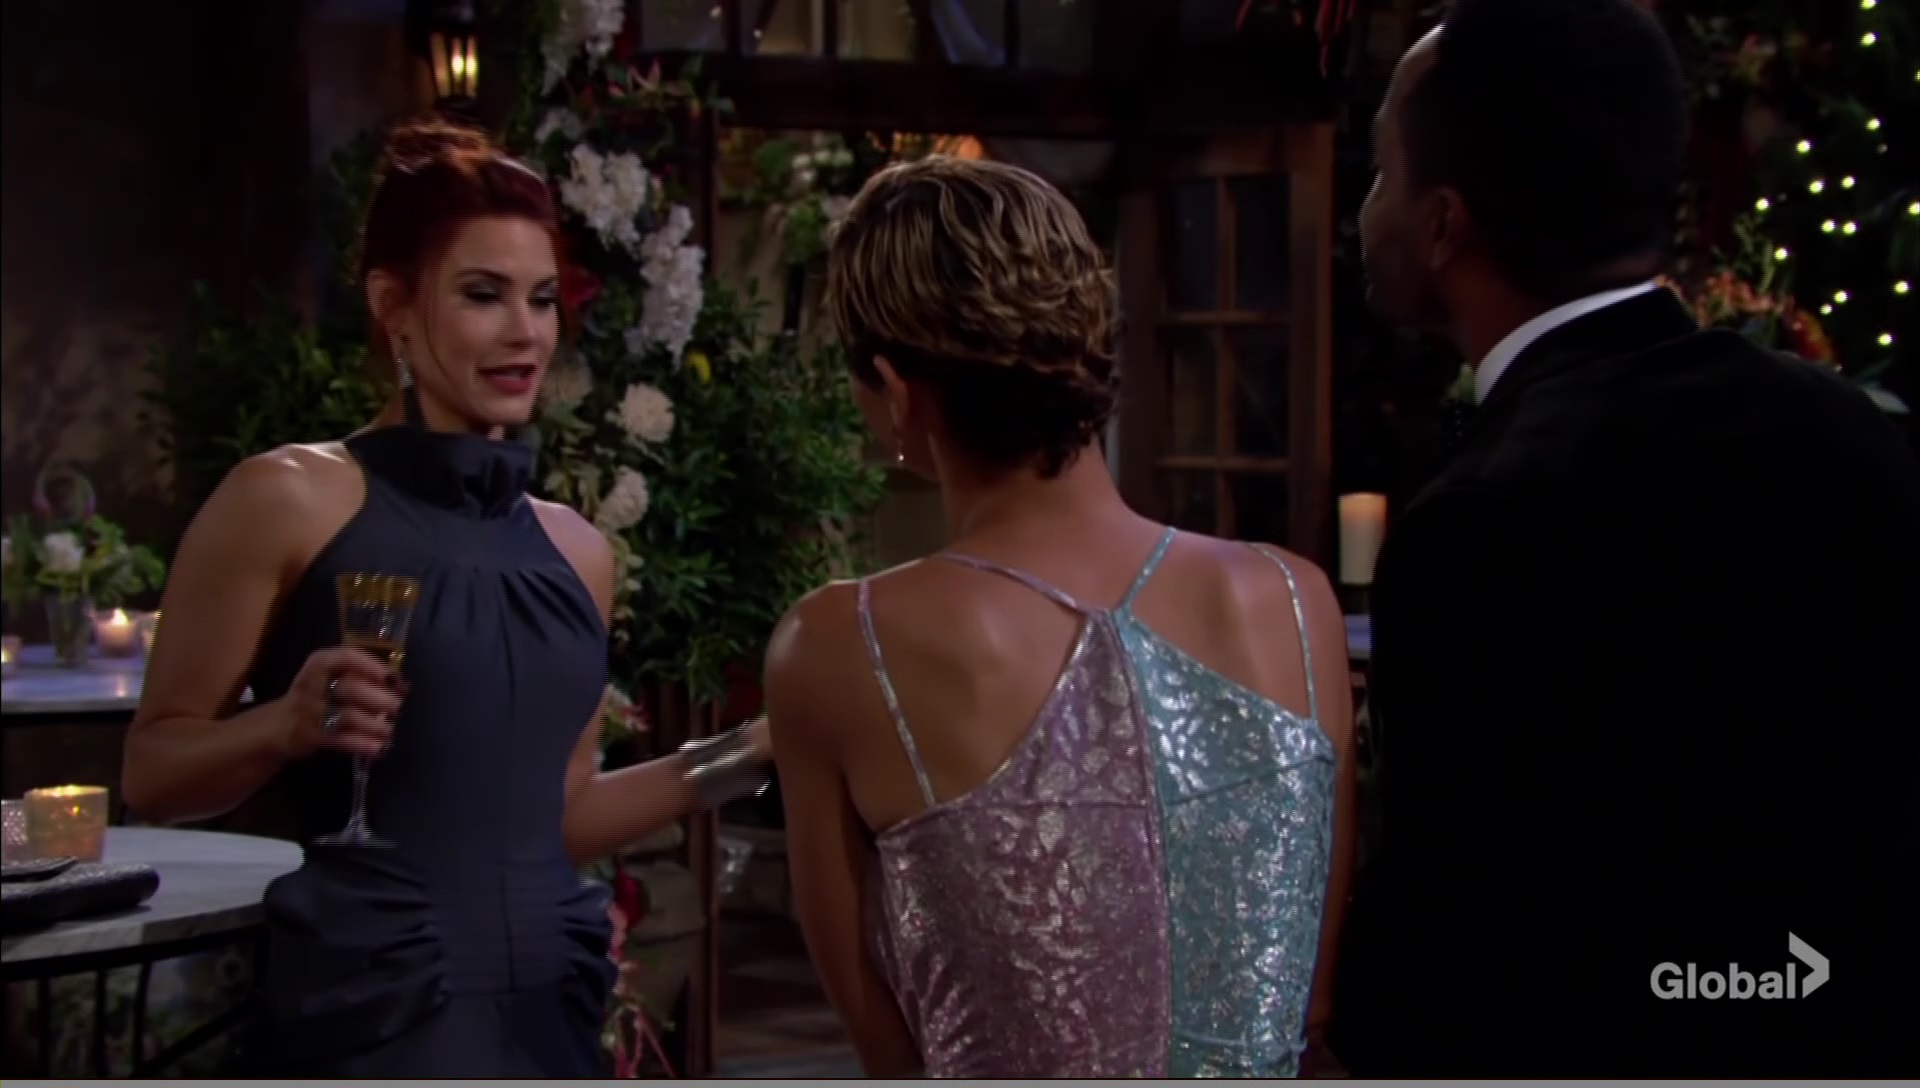 sally talks elena nate party young restless